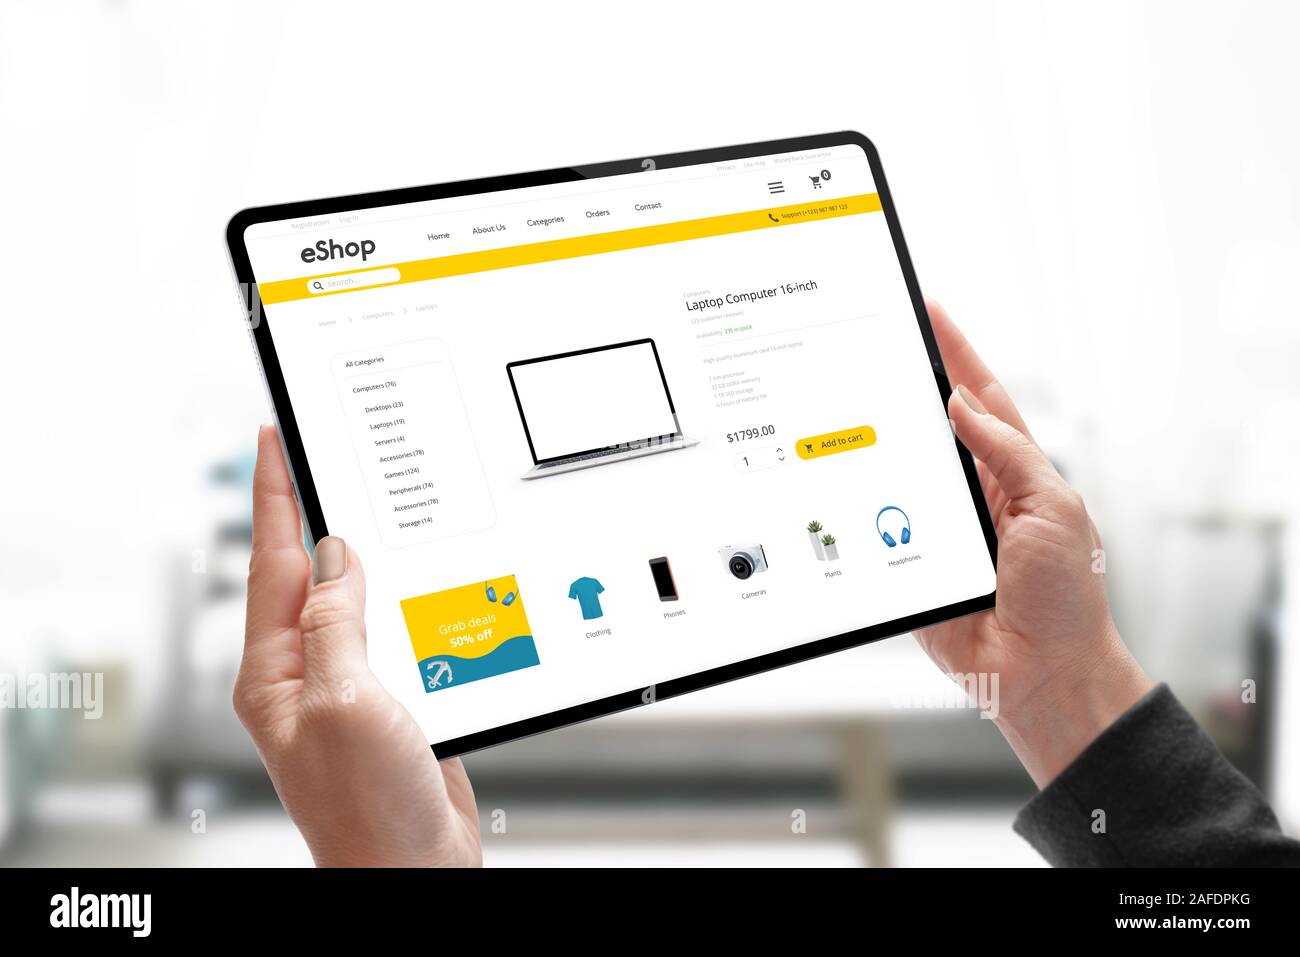 Online shopping website concept on tablet in woman hands. Woman search for laptop computer online Stock Photo